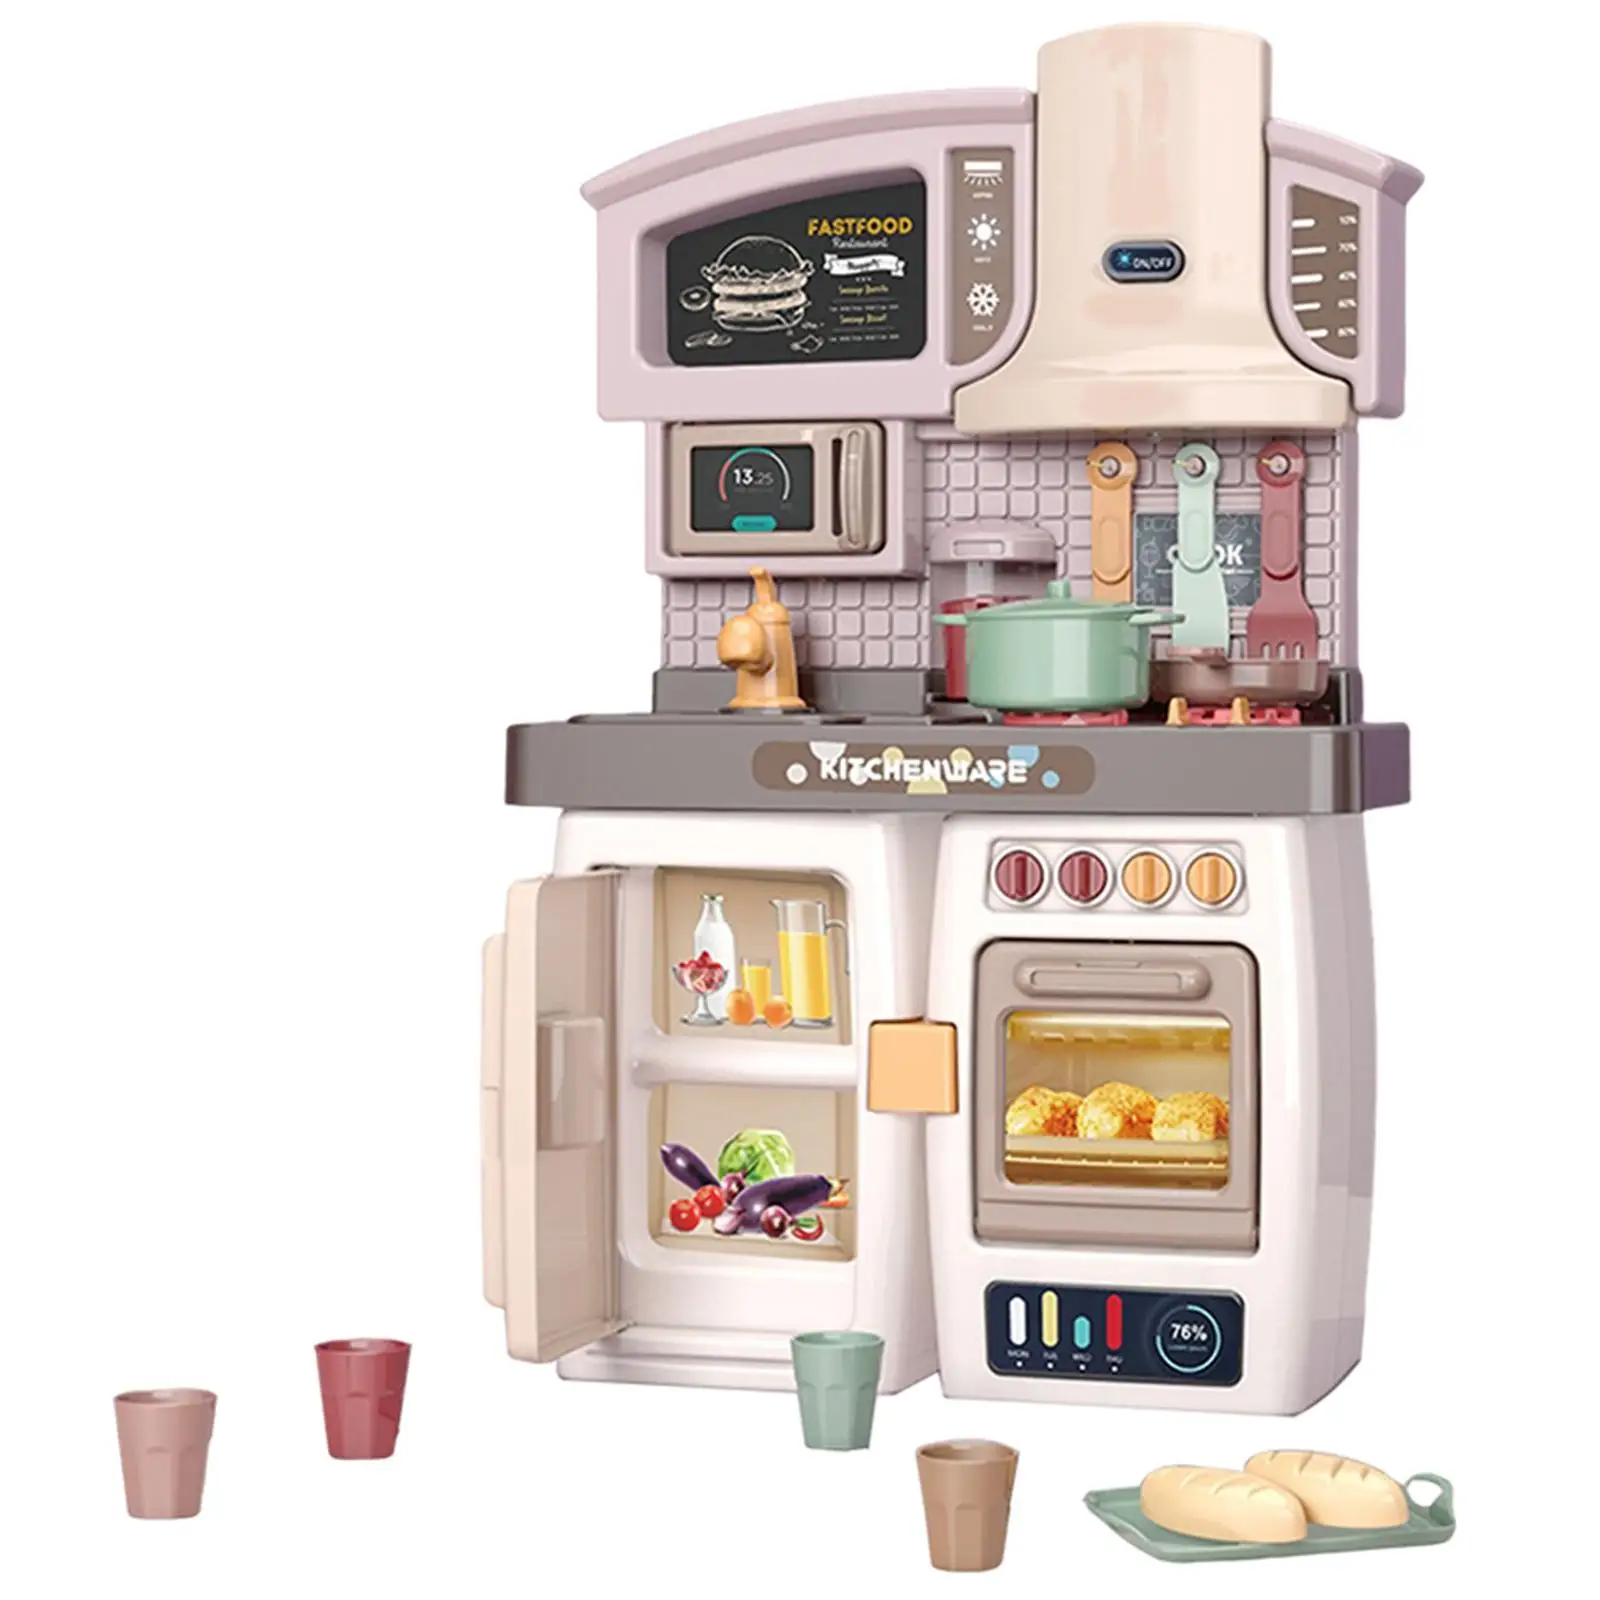 Portable Kids Kitchen Playset Educational Simulation Cooking Sink Play Kitchen Set for Birthday Interactive Toys Boys Girls